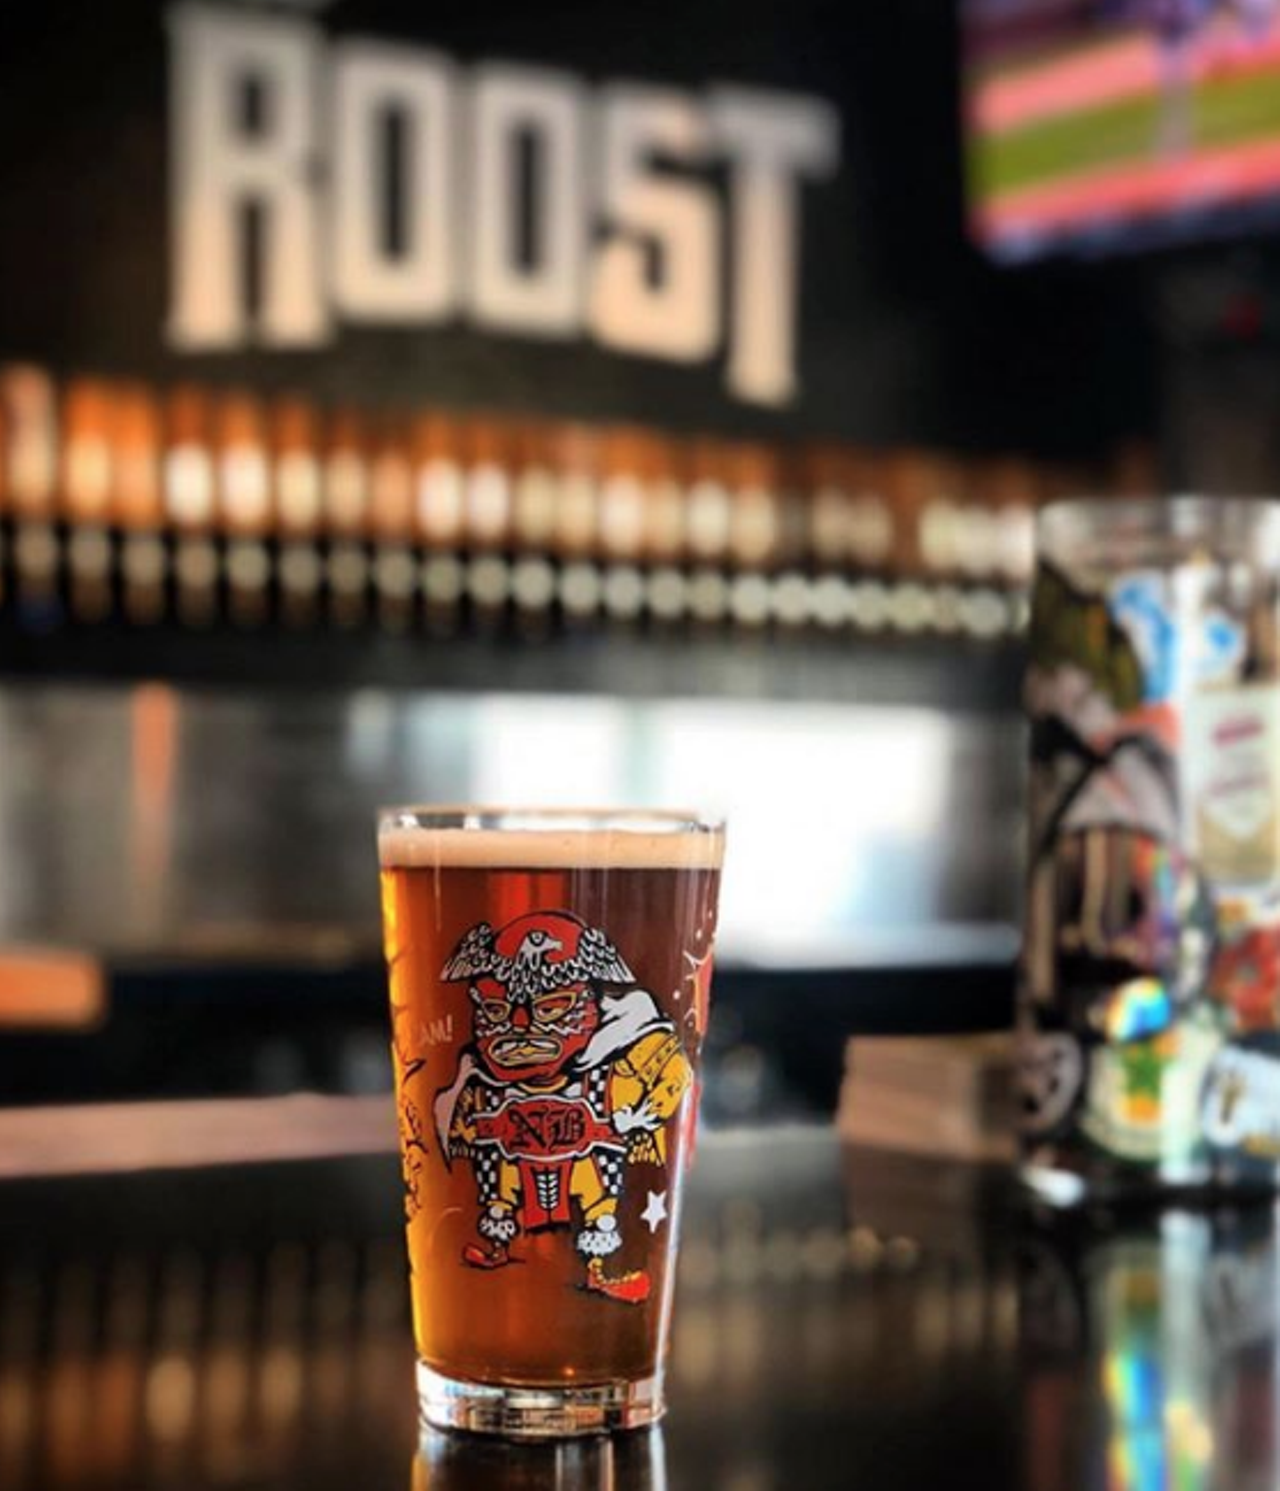 The Roost Pub & Cafe
In late September, San Antonians had to say goodbye to The Roost Pub & Cafe, a longtime drinking destination in downtown. The bar recently overhauled its programming and opened a new patio, but the business shared that the updates weren't enough to keep it in operation.
Photo via Instagram / theroostsa